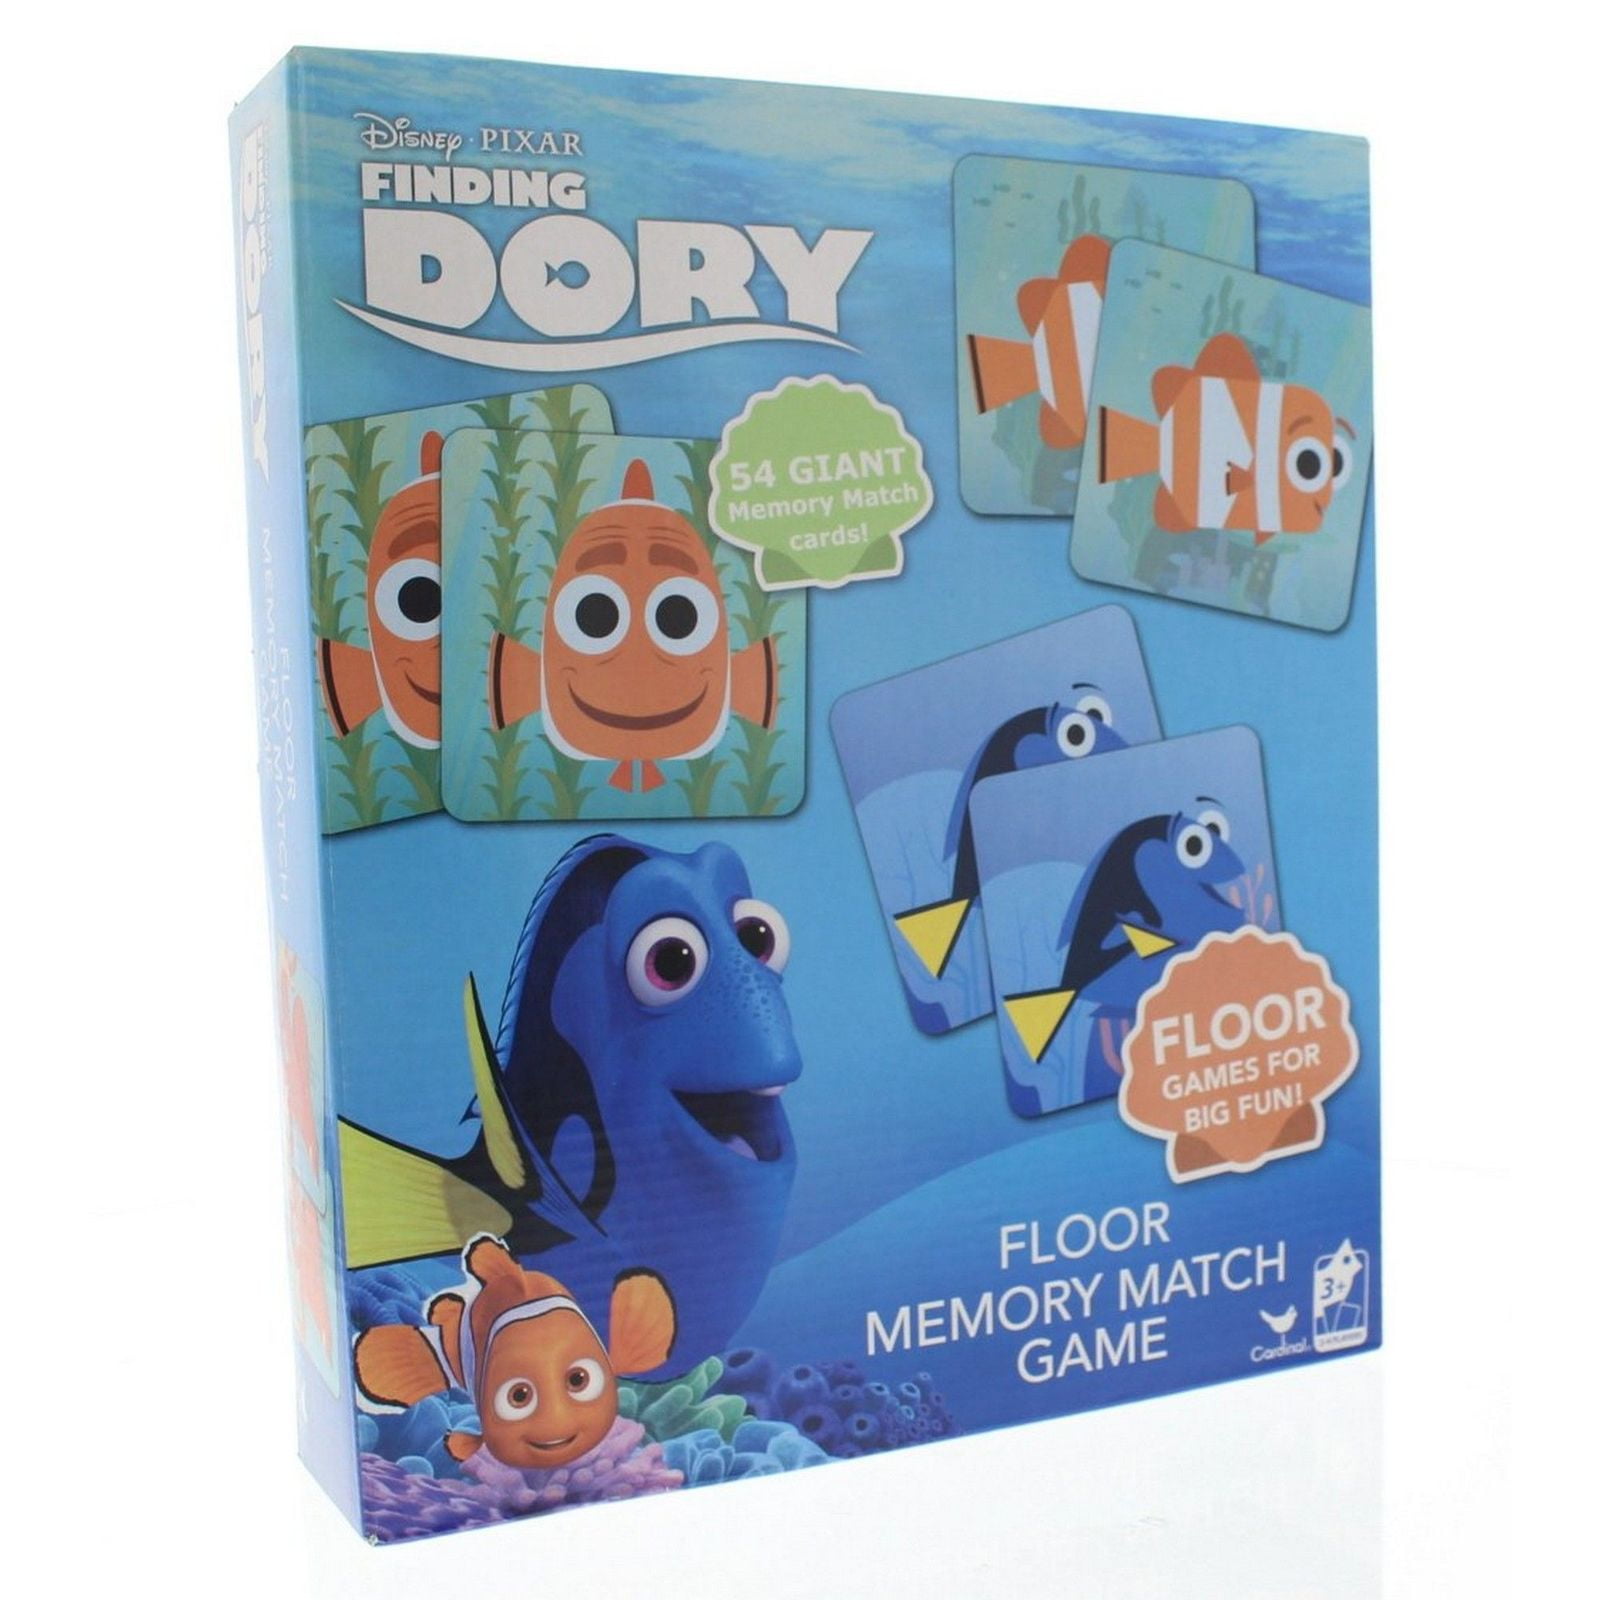 Baby Dory Gets Home Board Game 